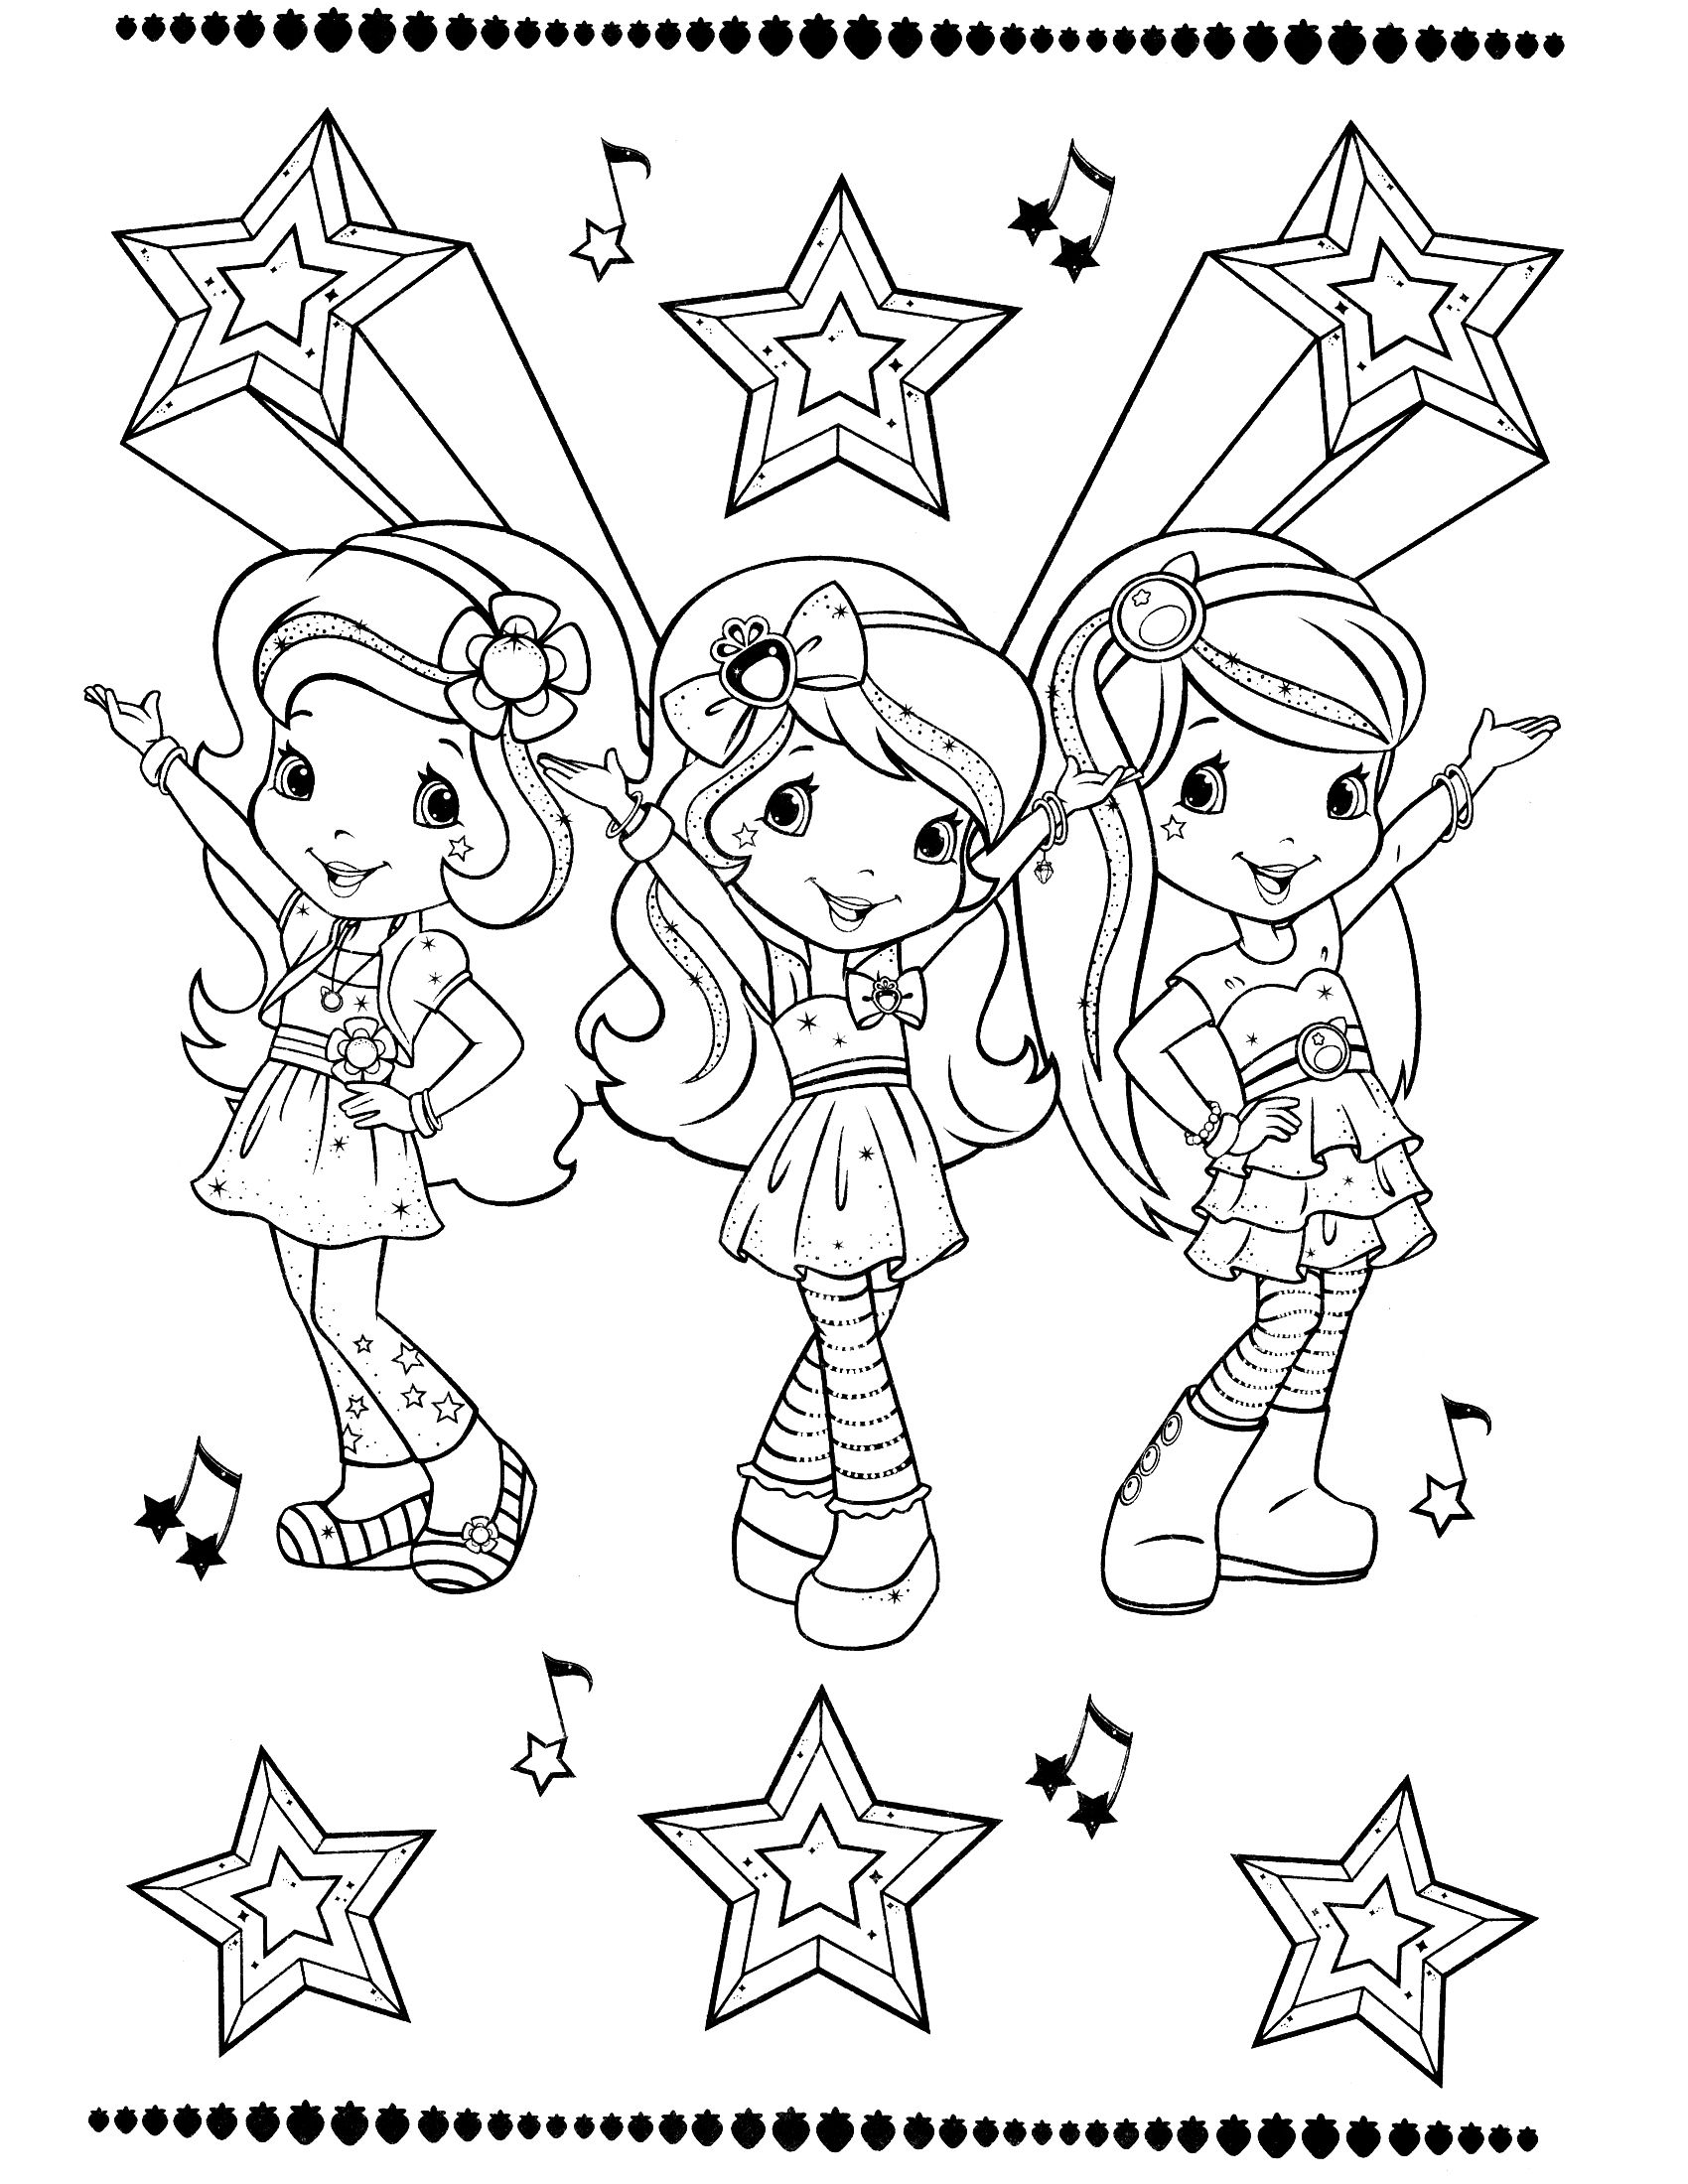 Strawberry Shortcake And All Friends Coloring Pages - Coloring Home